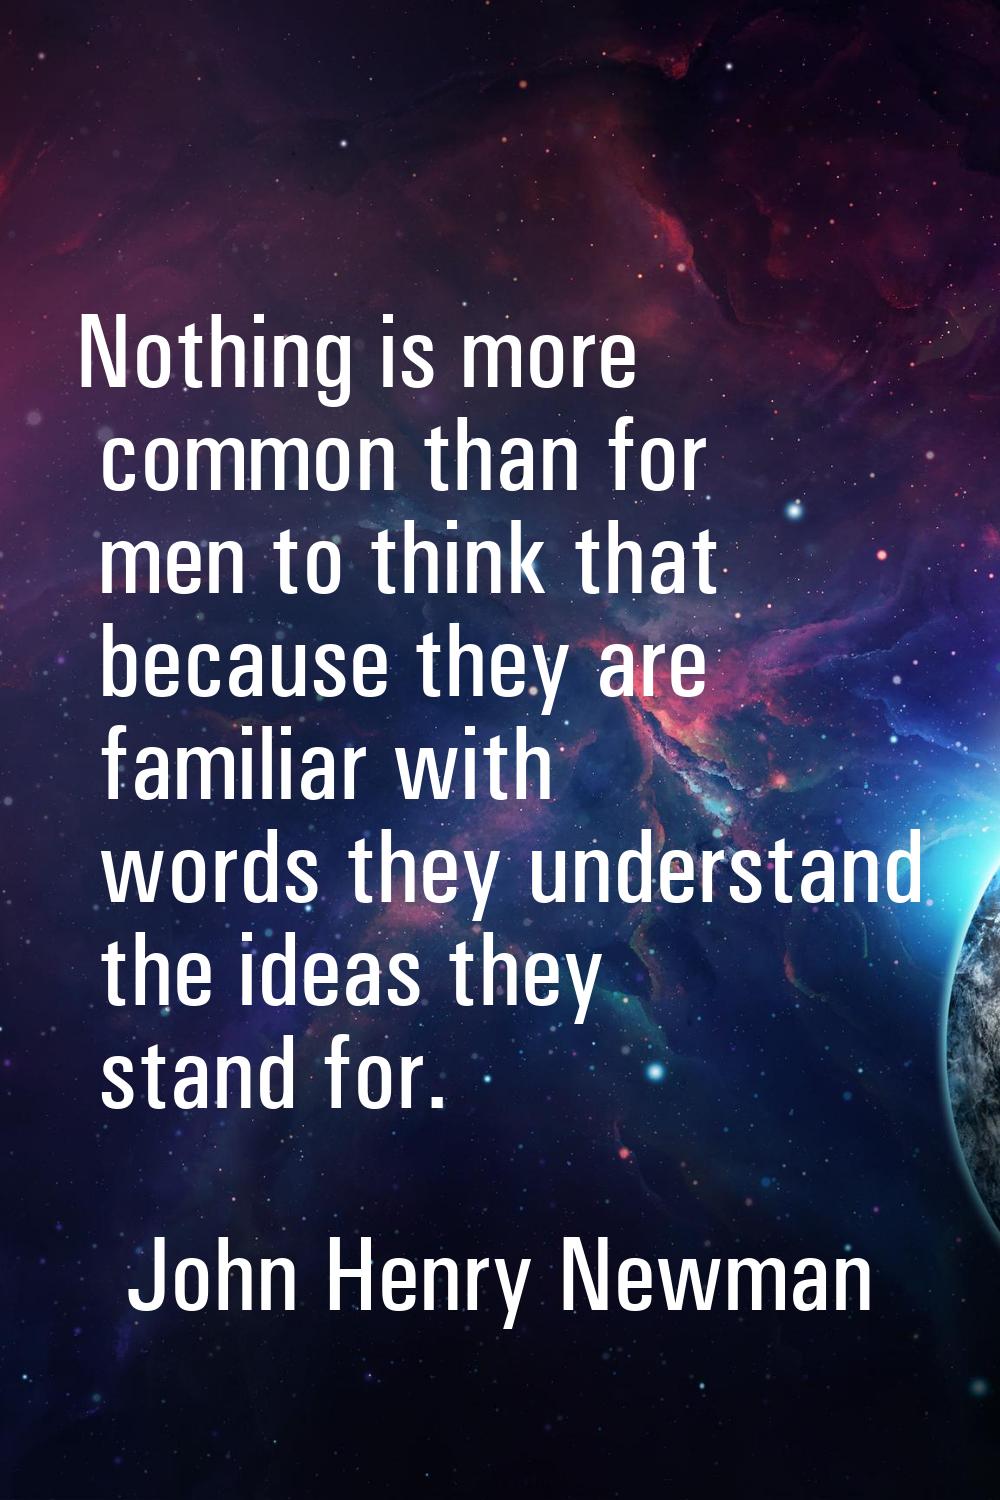 Nothing is more common than for men to think that because they are familiar with words they underst